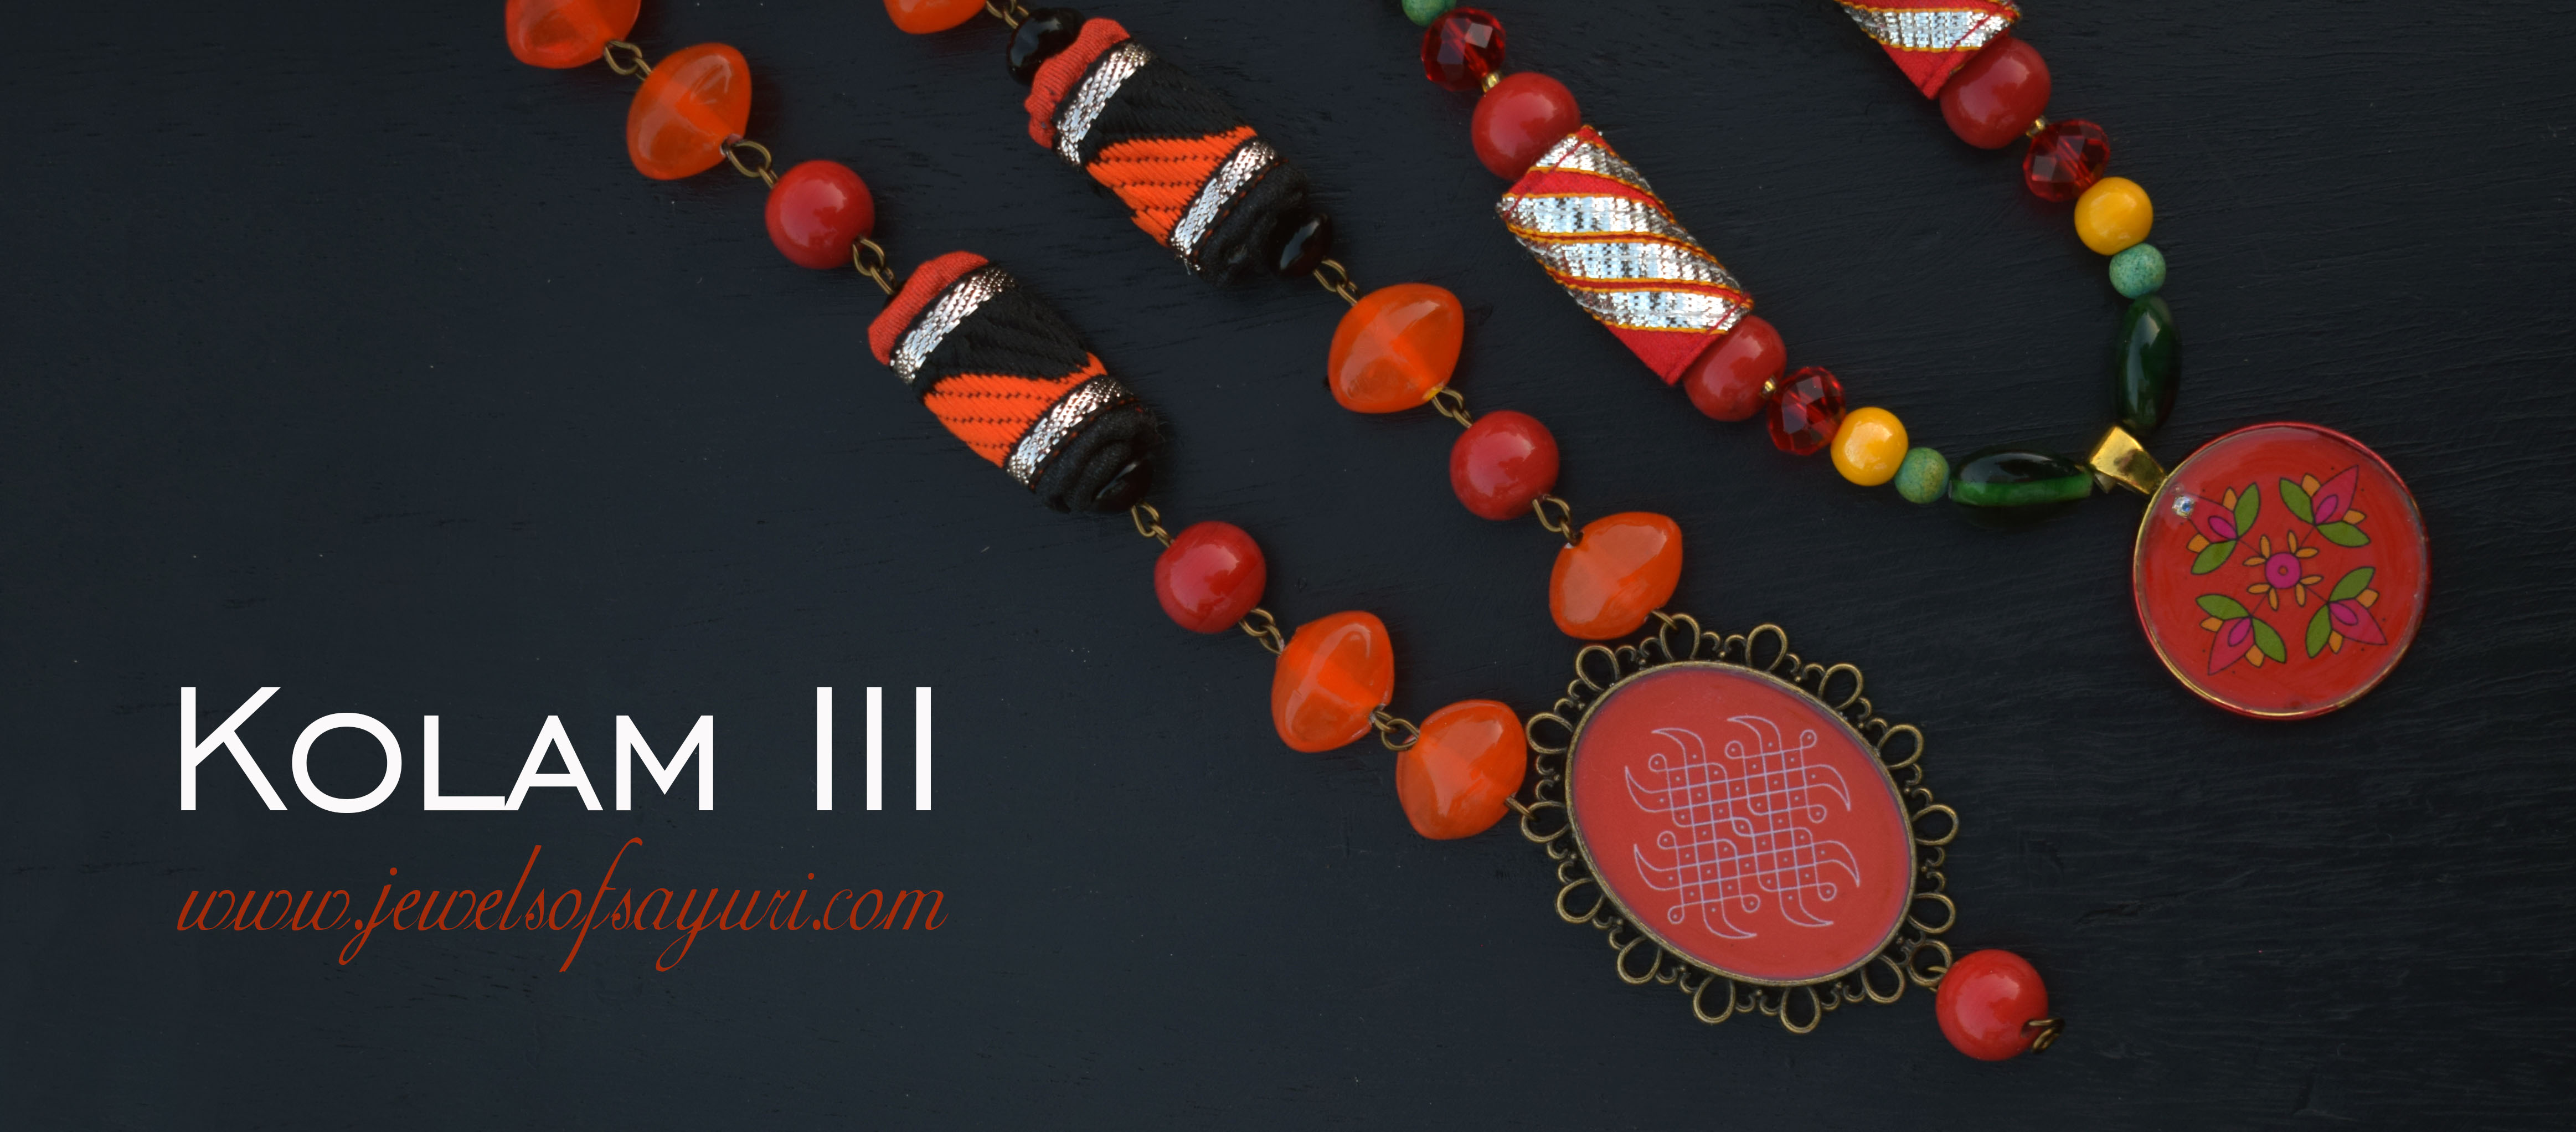 Monochromatic and Tetradic Kolam necklace from the Kolam III collection